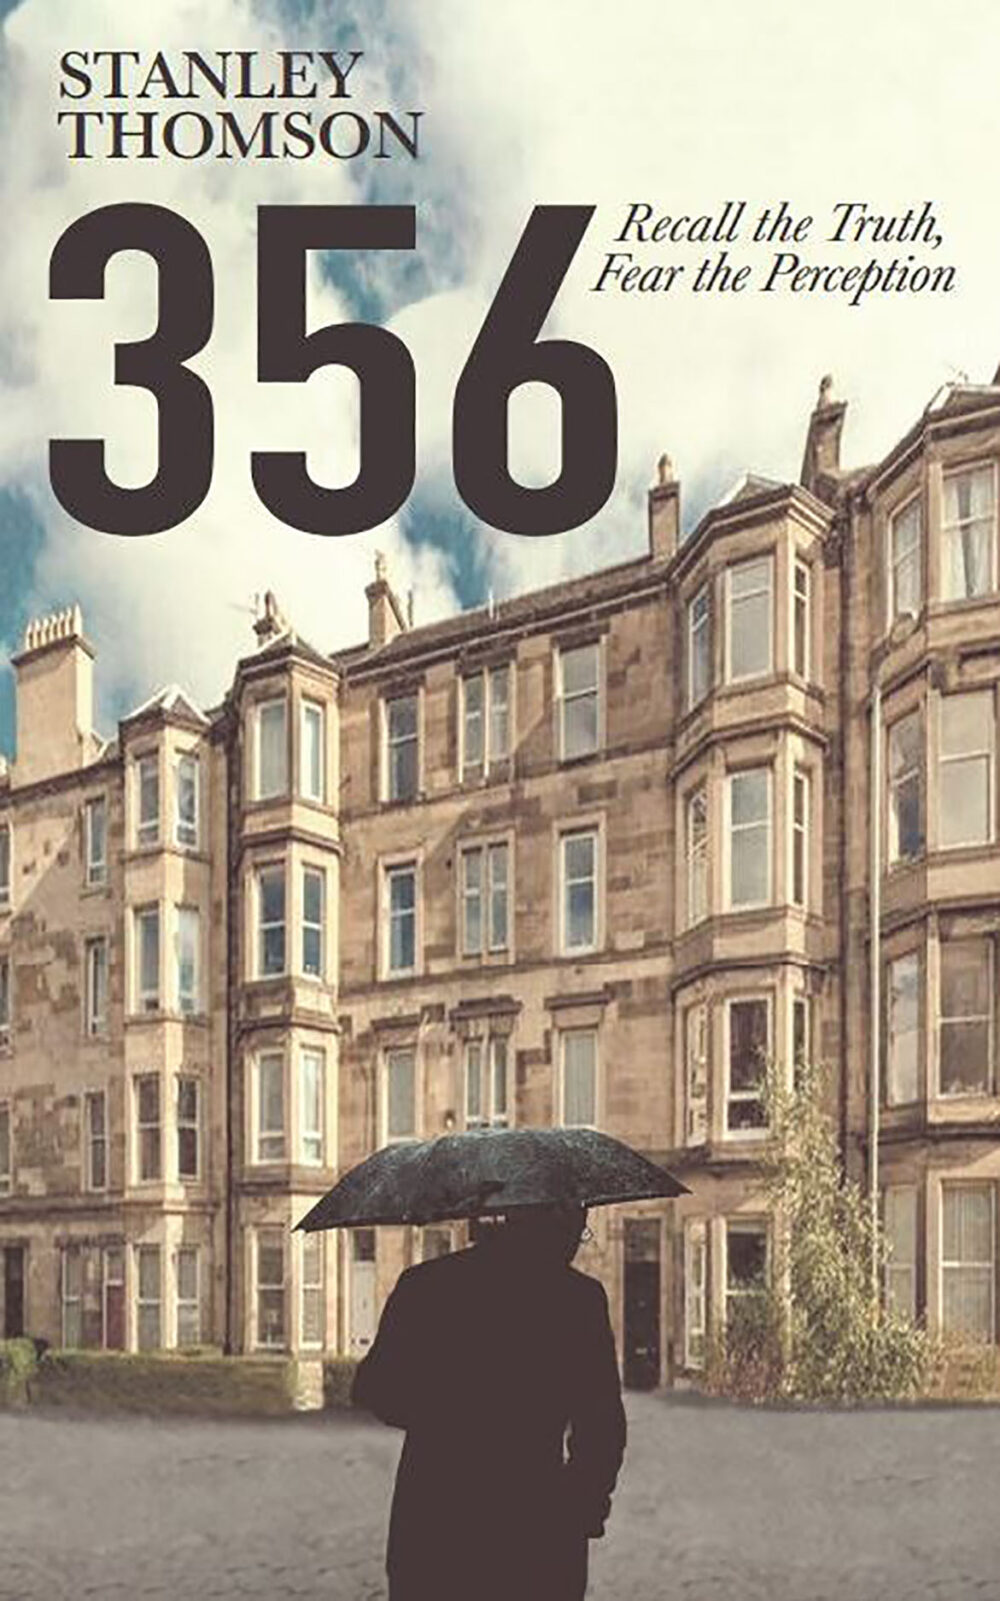 356 by self-published author Stanley Thomson